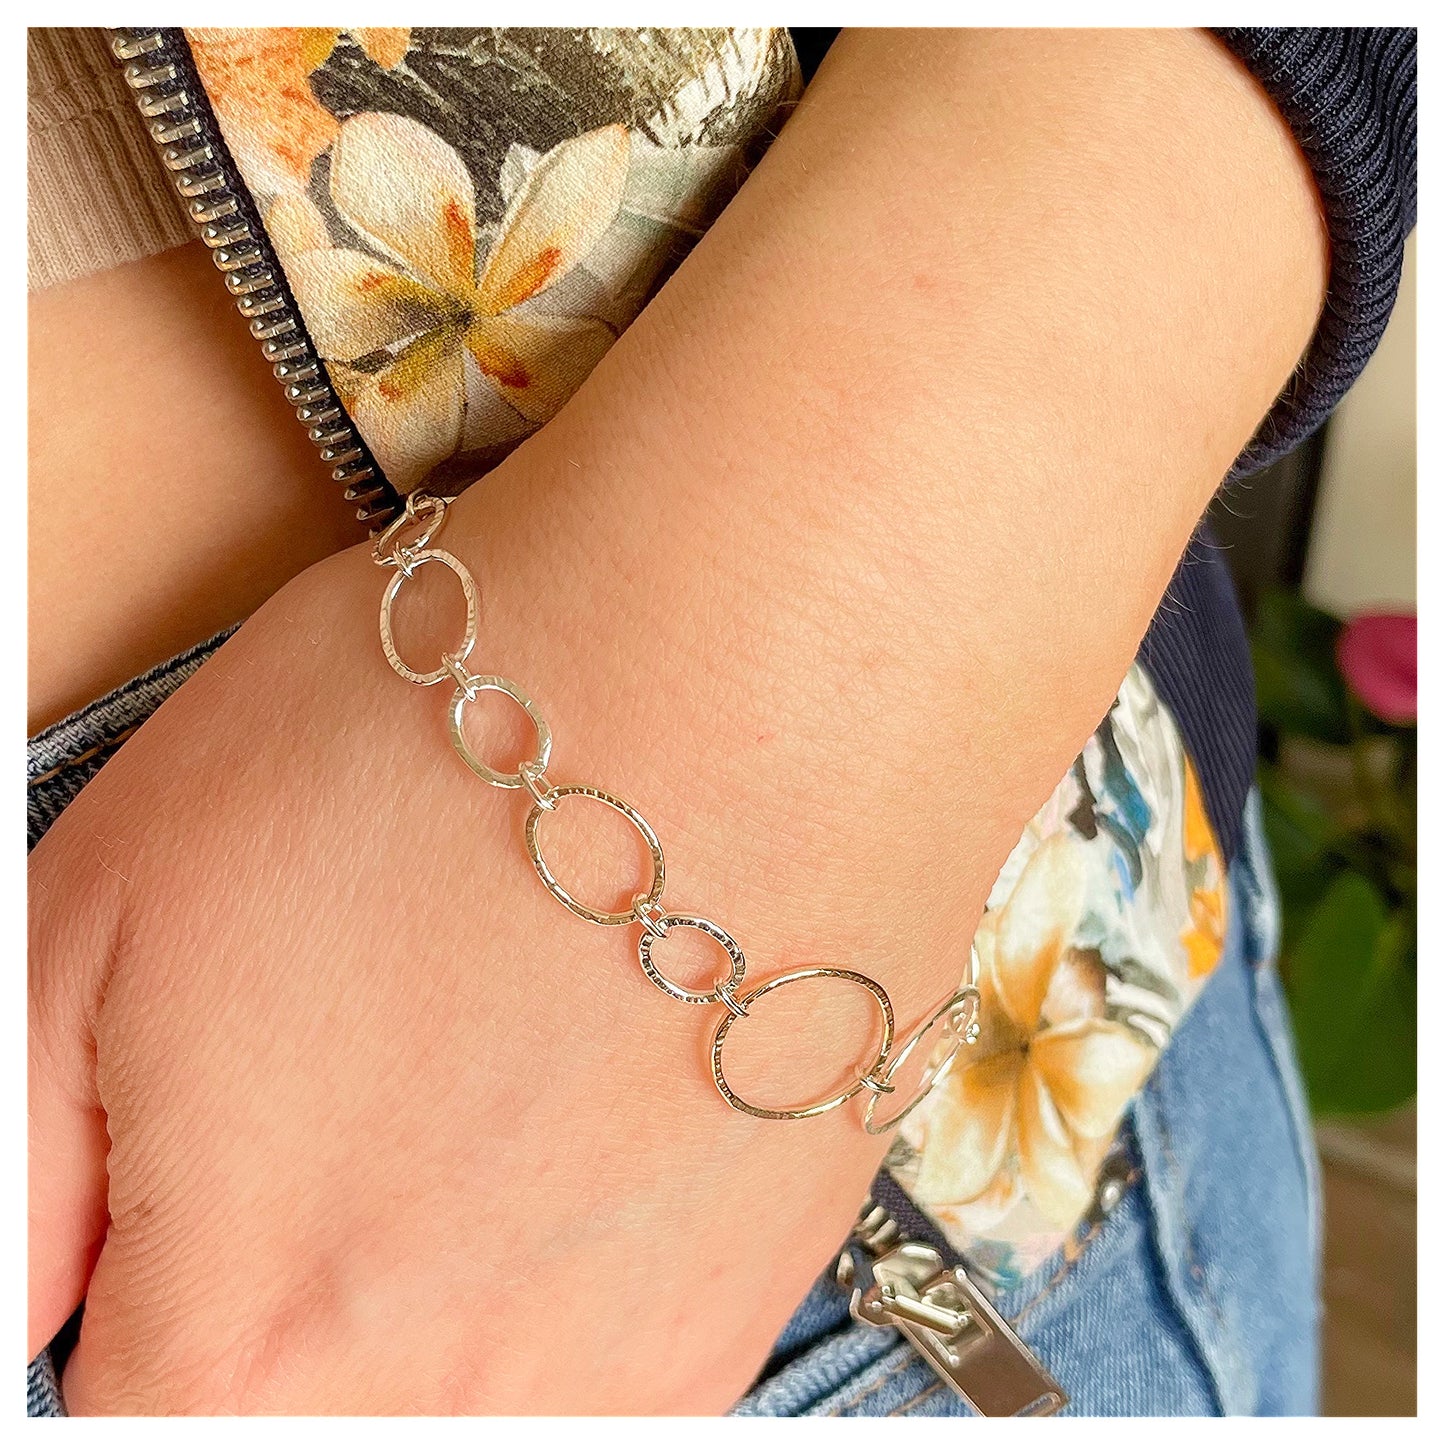 9ct yellow Gold and Sterling Silver Oval Link Chain Bracelet.